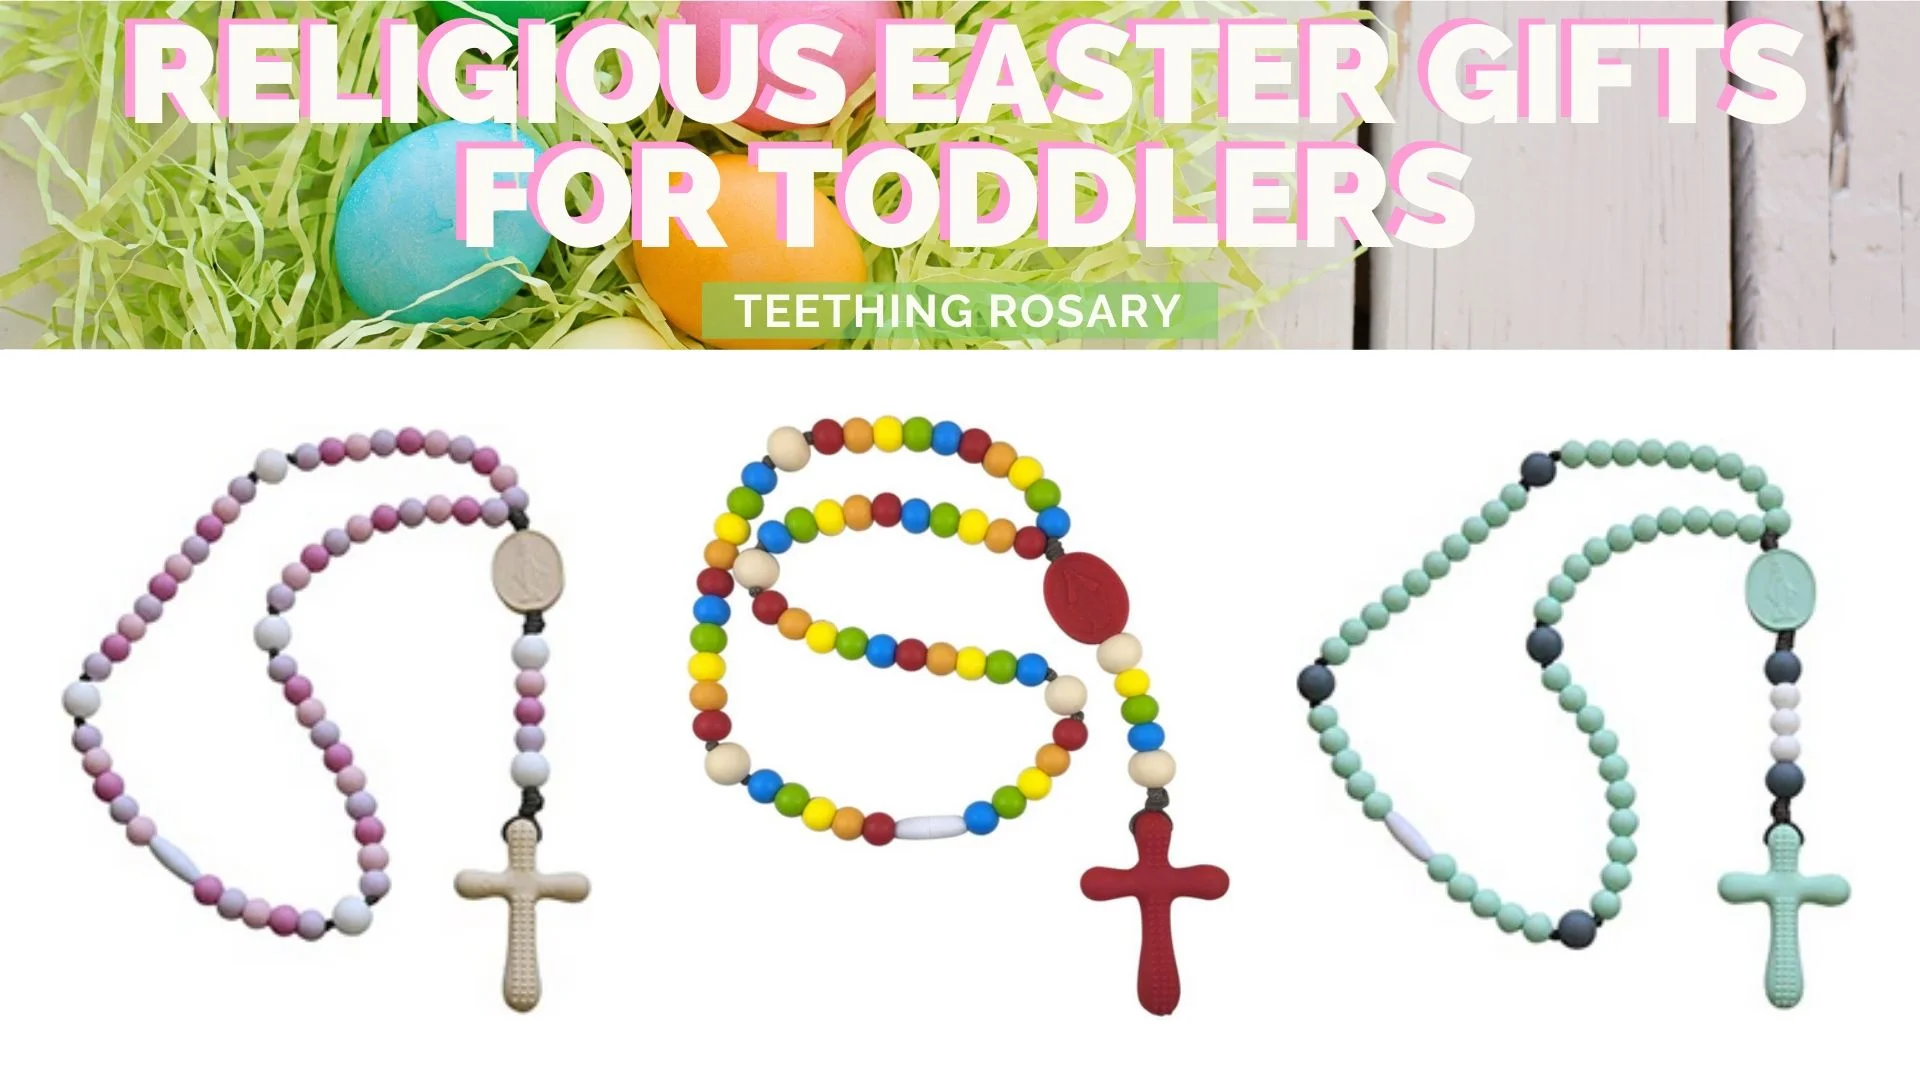 teething rosary for easter gifts for toddlers  and babies